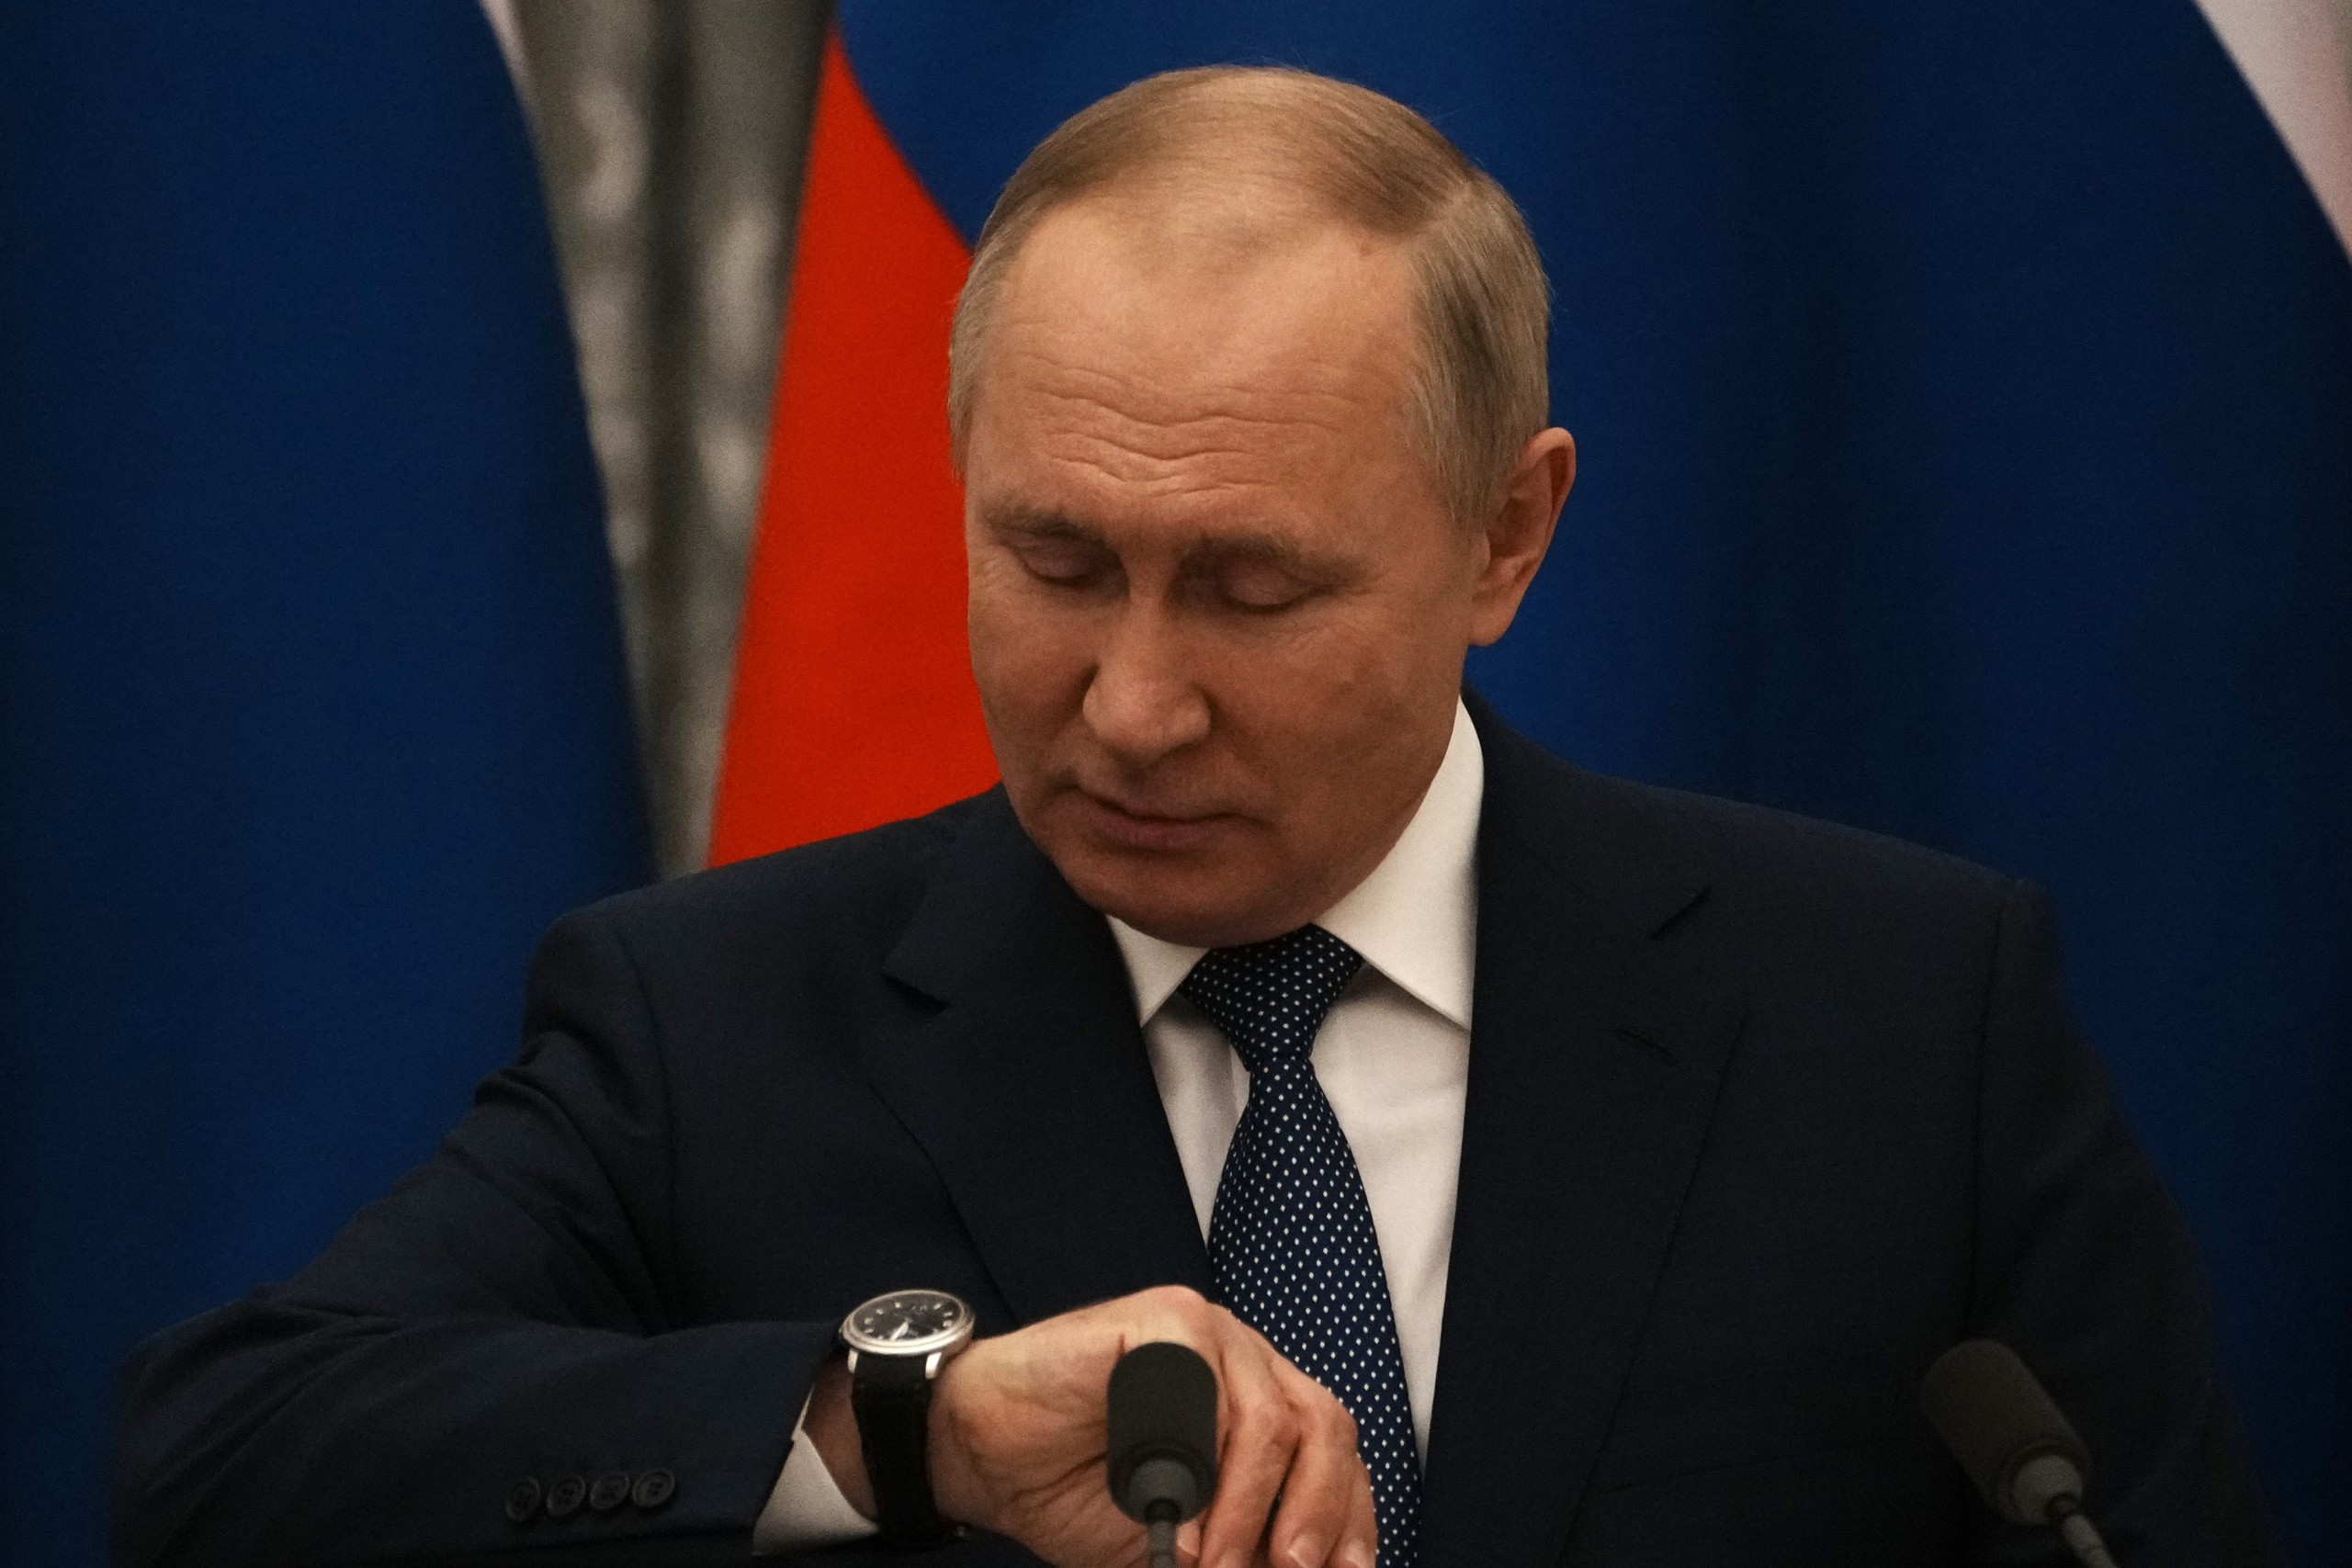 epa09736527 Russian President Vladimir Putin checks his watch before a press conference with French President Emmanuel Macron after their talks in the Kremlin in Moscow, Russia, 07 February2022. International efforts to defuse the standoff over Ukraine intensified with French President Emmanuel Macron holding talks in Moscow and German Chancellor Olaf Scholz in Washington to coordinate policies as fears of a Russian invasion mount.  EPA/THIBAULT CAMUS / POOL MAXPPP OUT